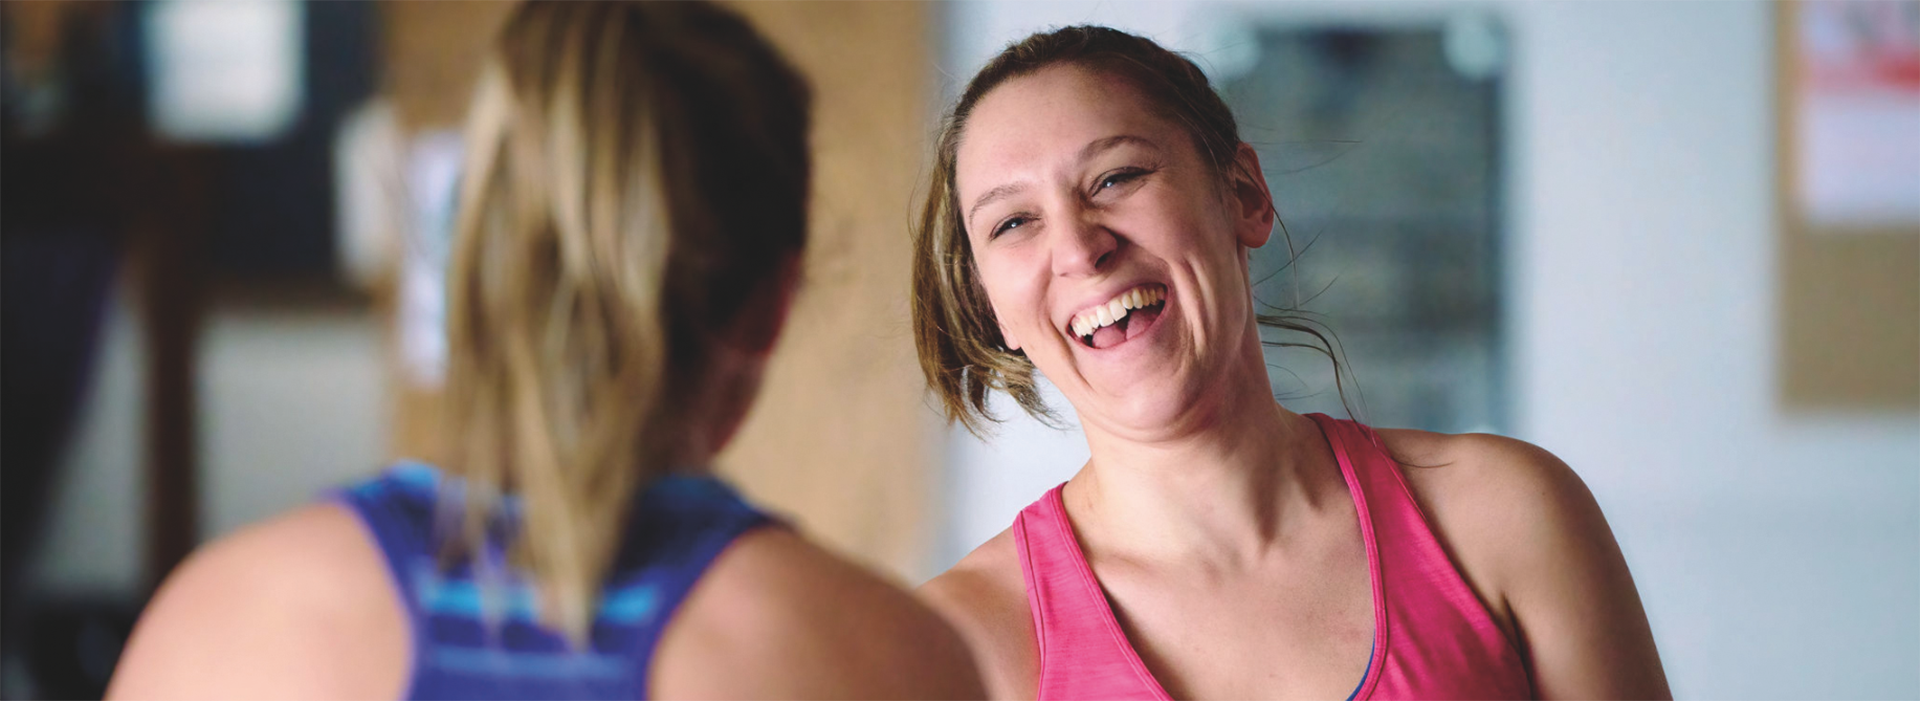 two adults in workout clothes laugh together after a fitness class 